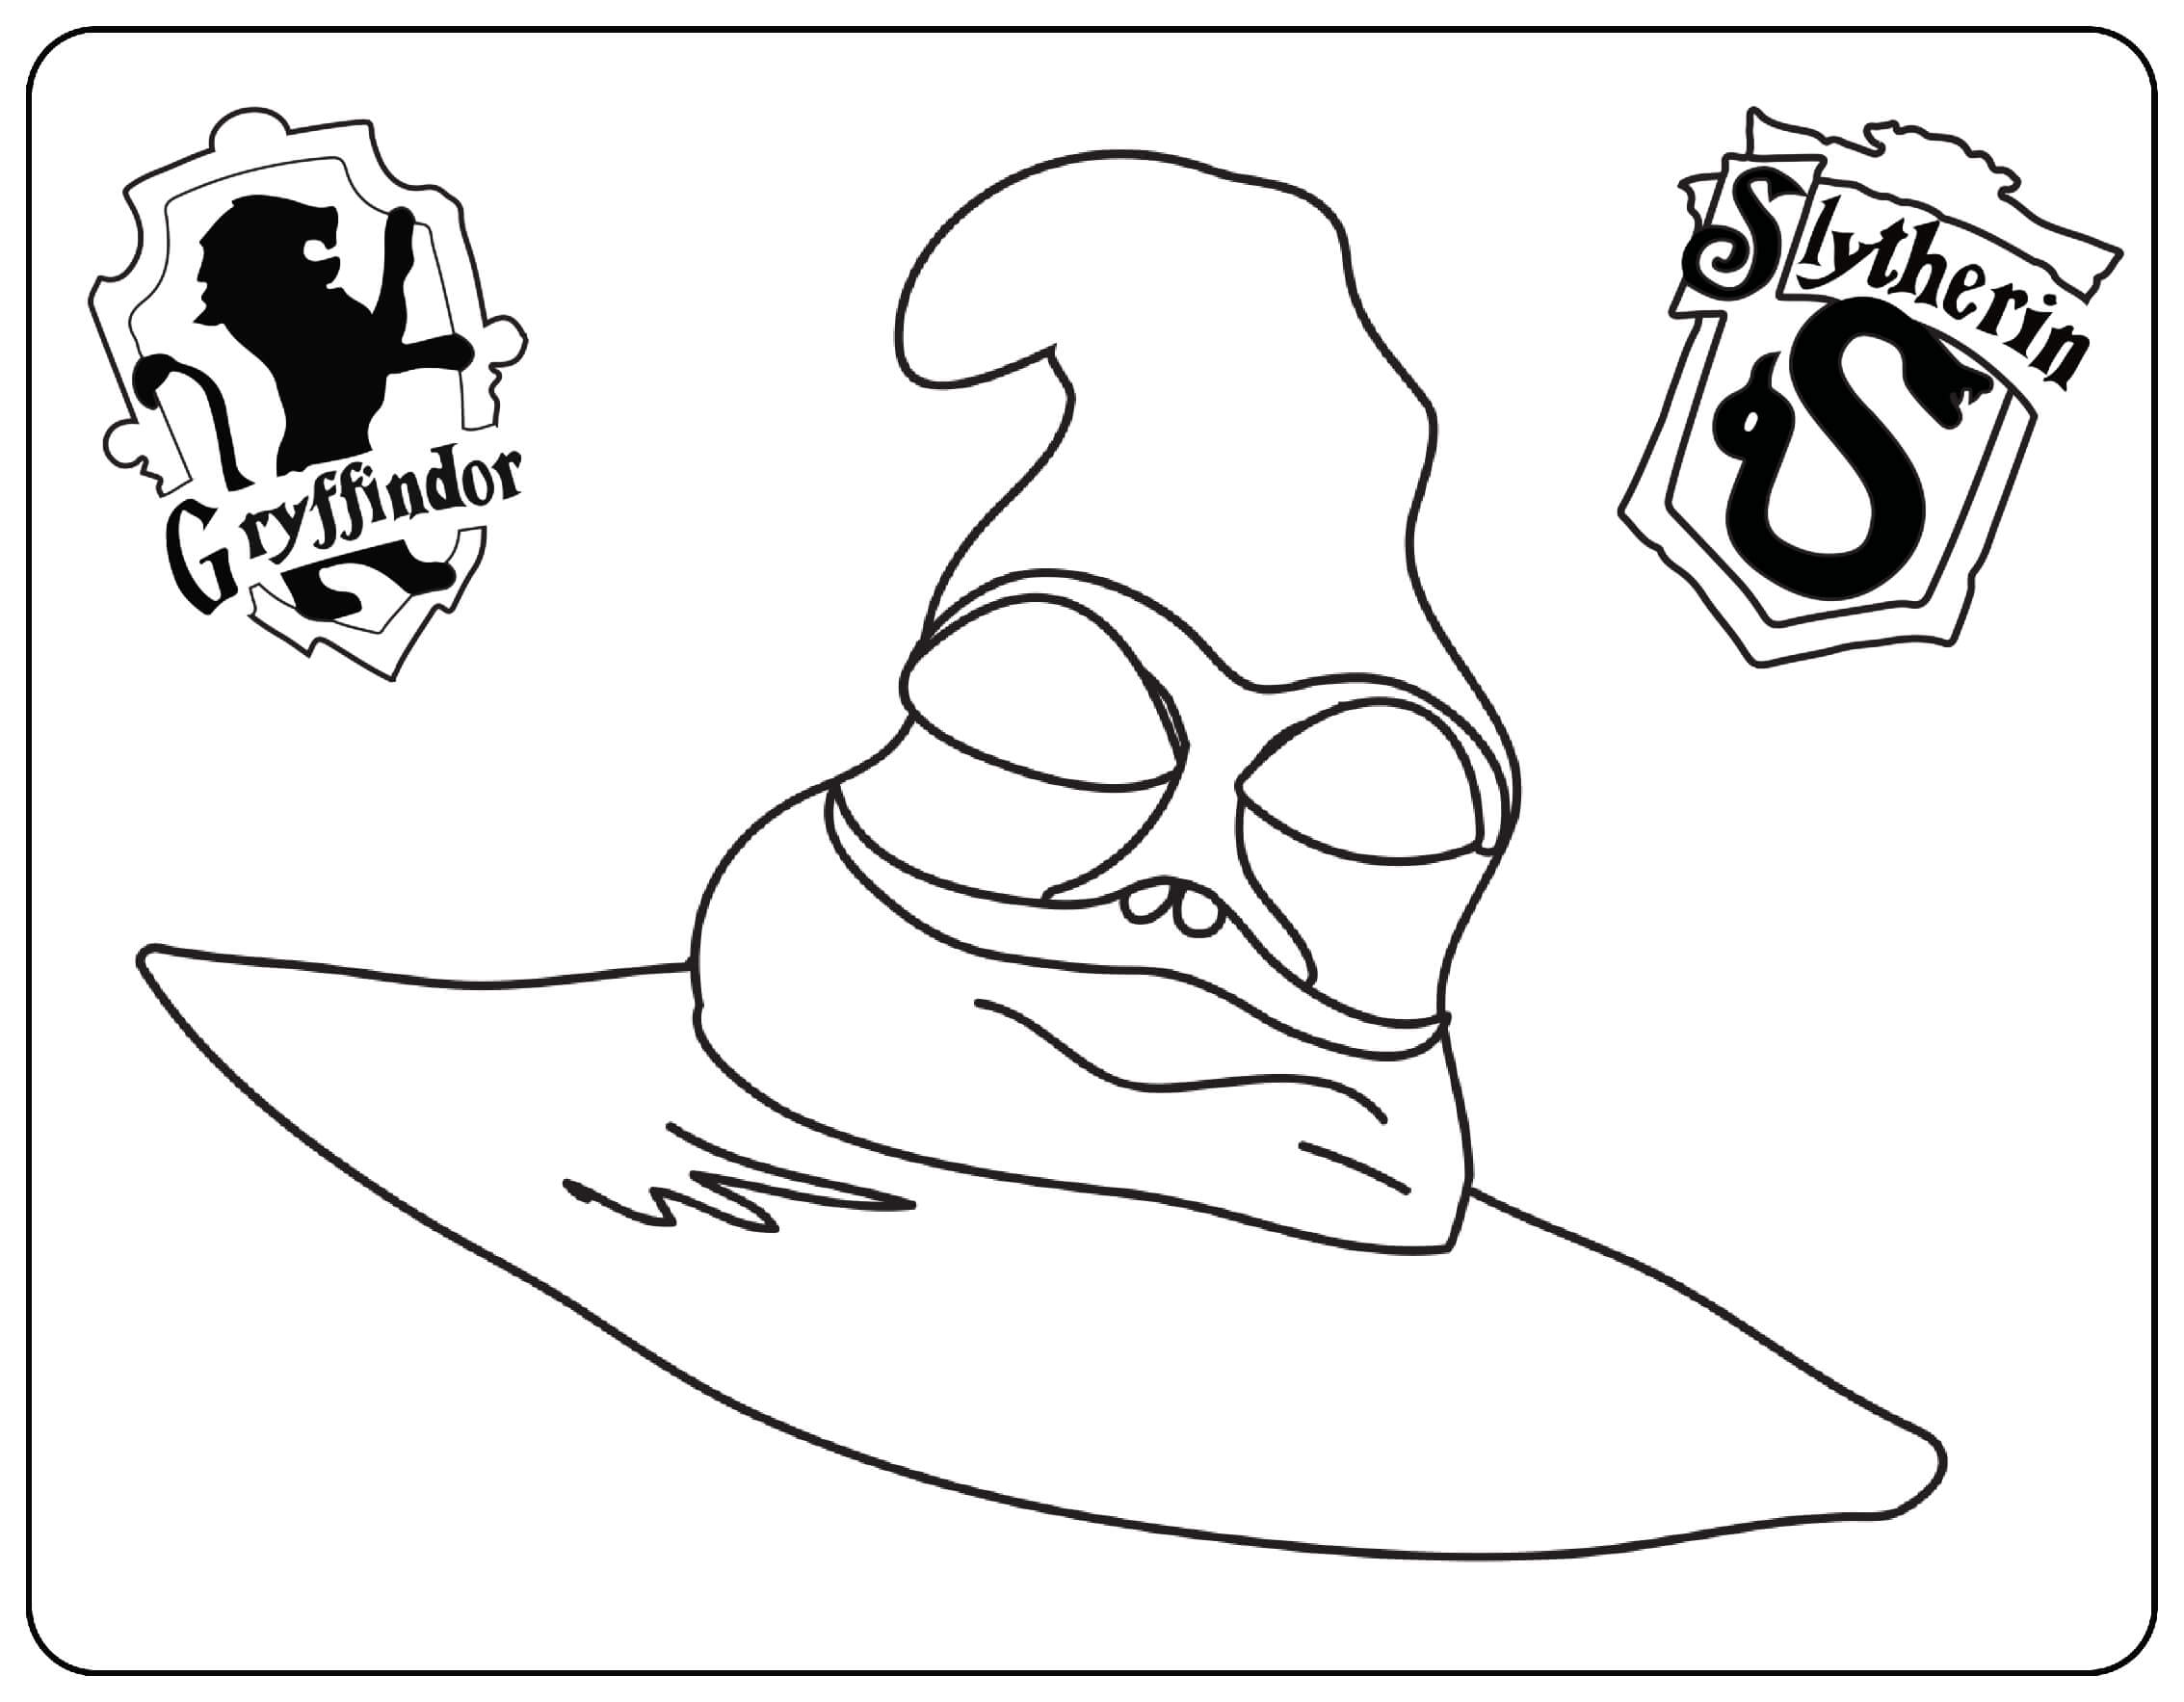 Sorting Hat Coloring Page